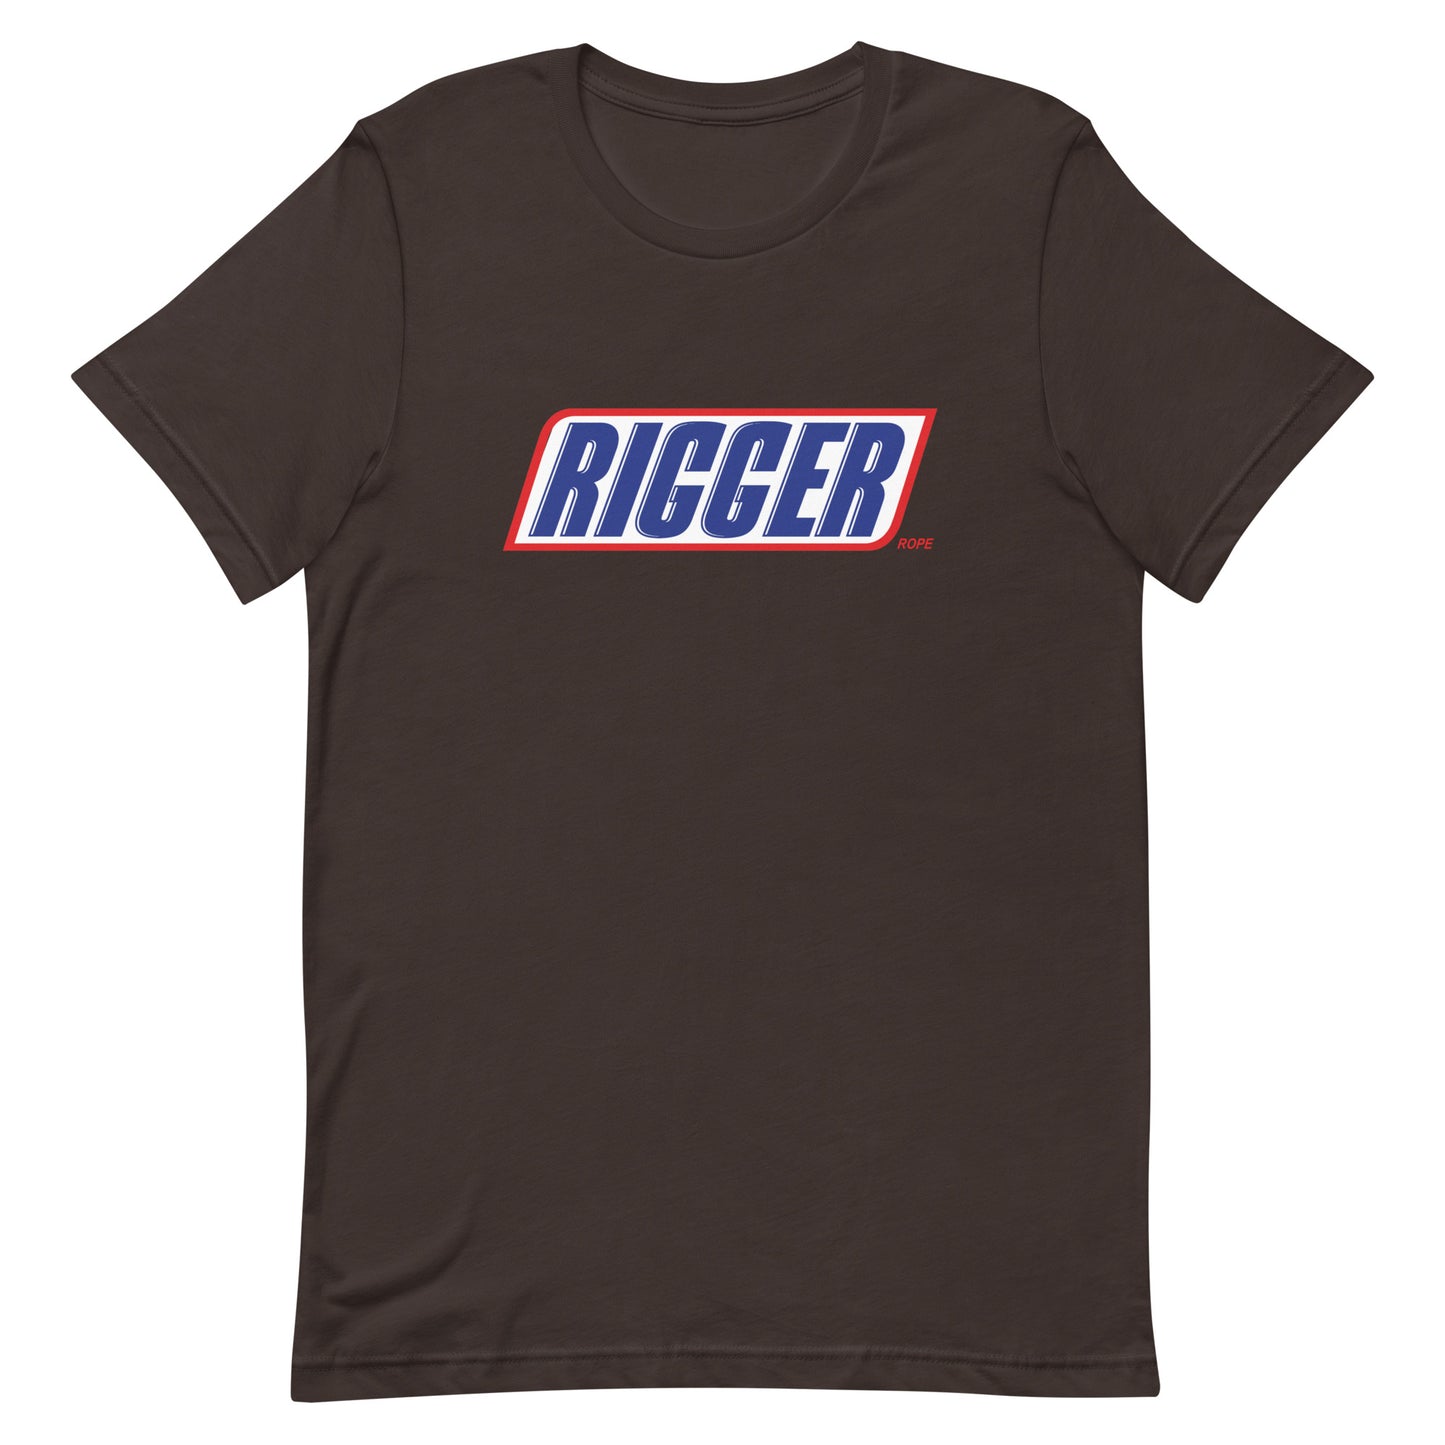 The Rigger Tee (unisex)